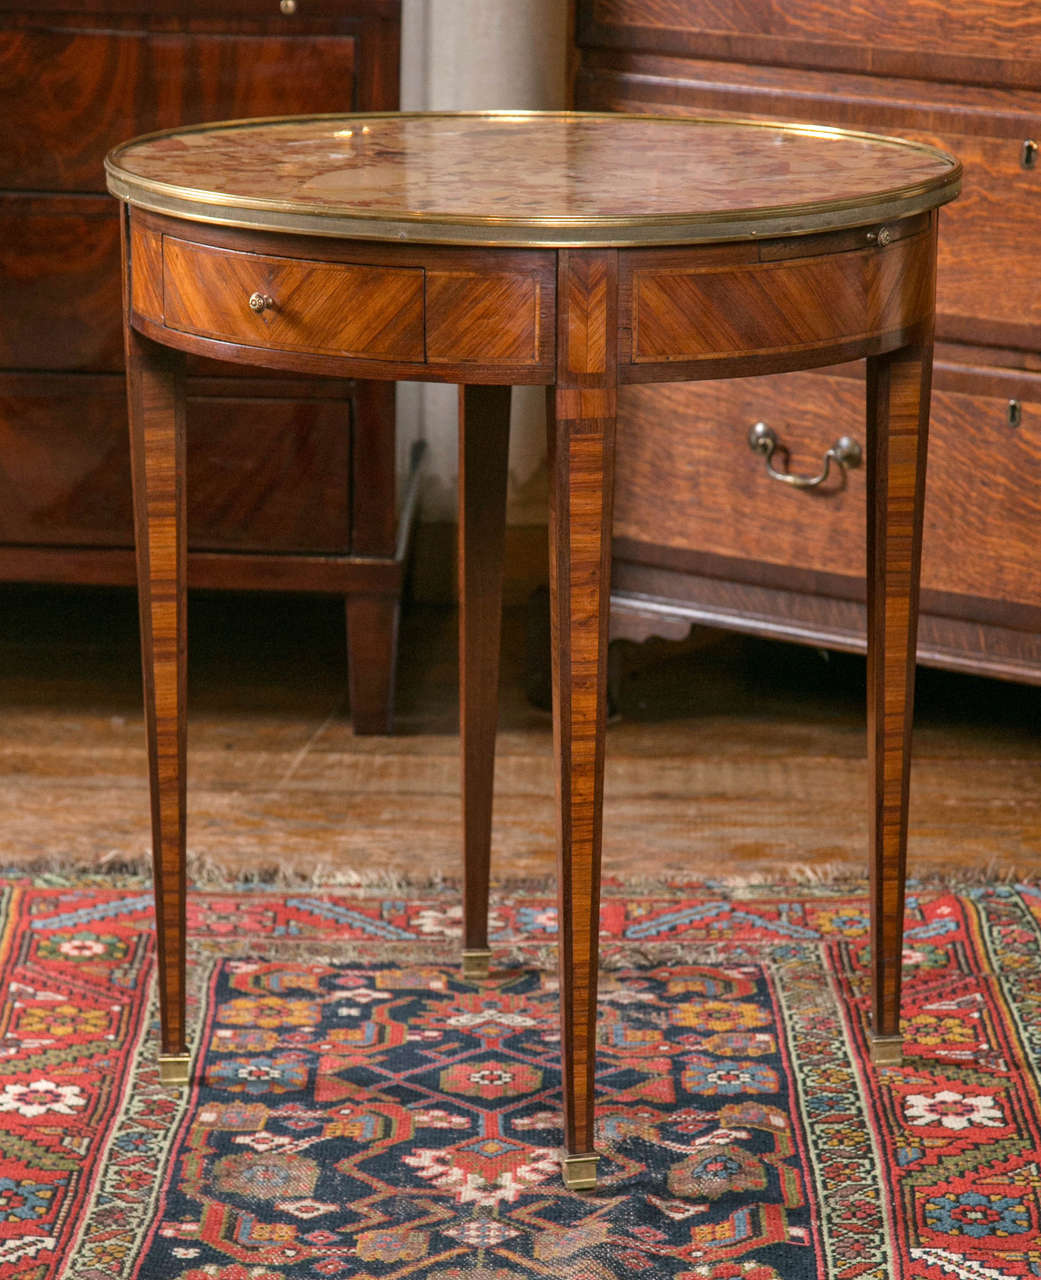 Parquetry in kingwood and tulip wood is expertly employed here to give this table a stately demeanor. The brass gallery surrounding the marble-top does nothing to refute this. Two opposing drawers and candle slides offer extra functions not normally